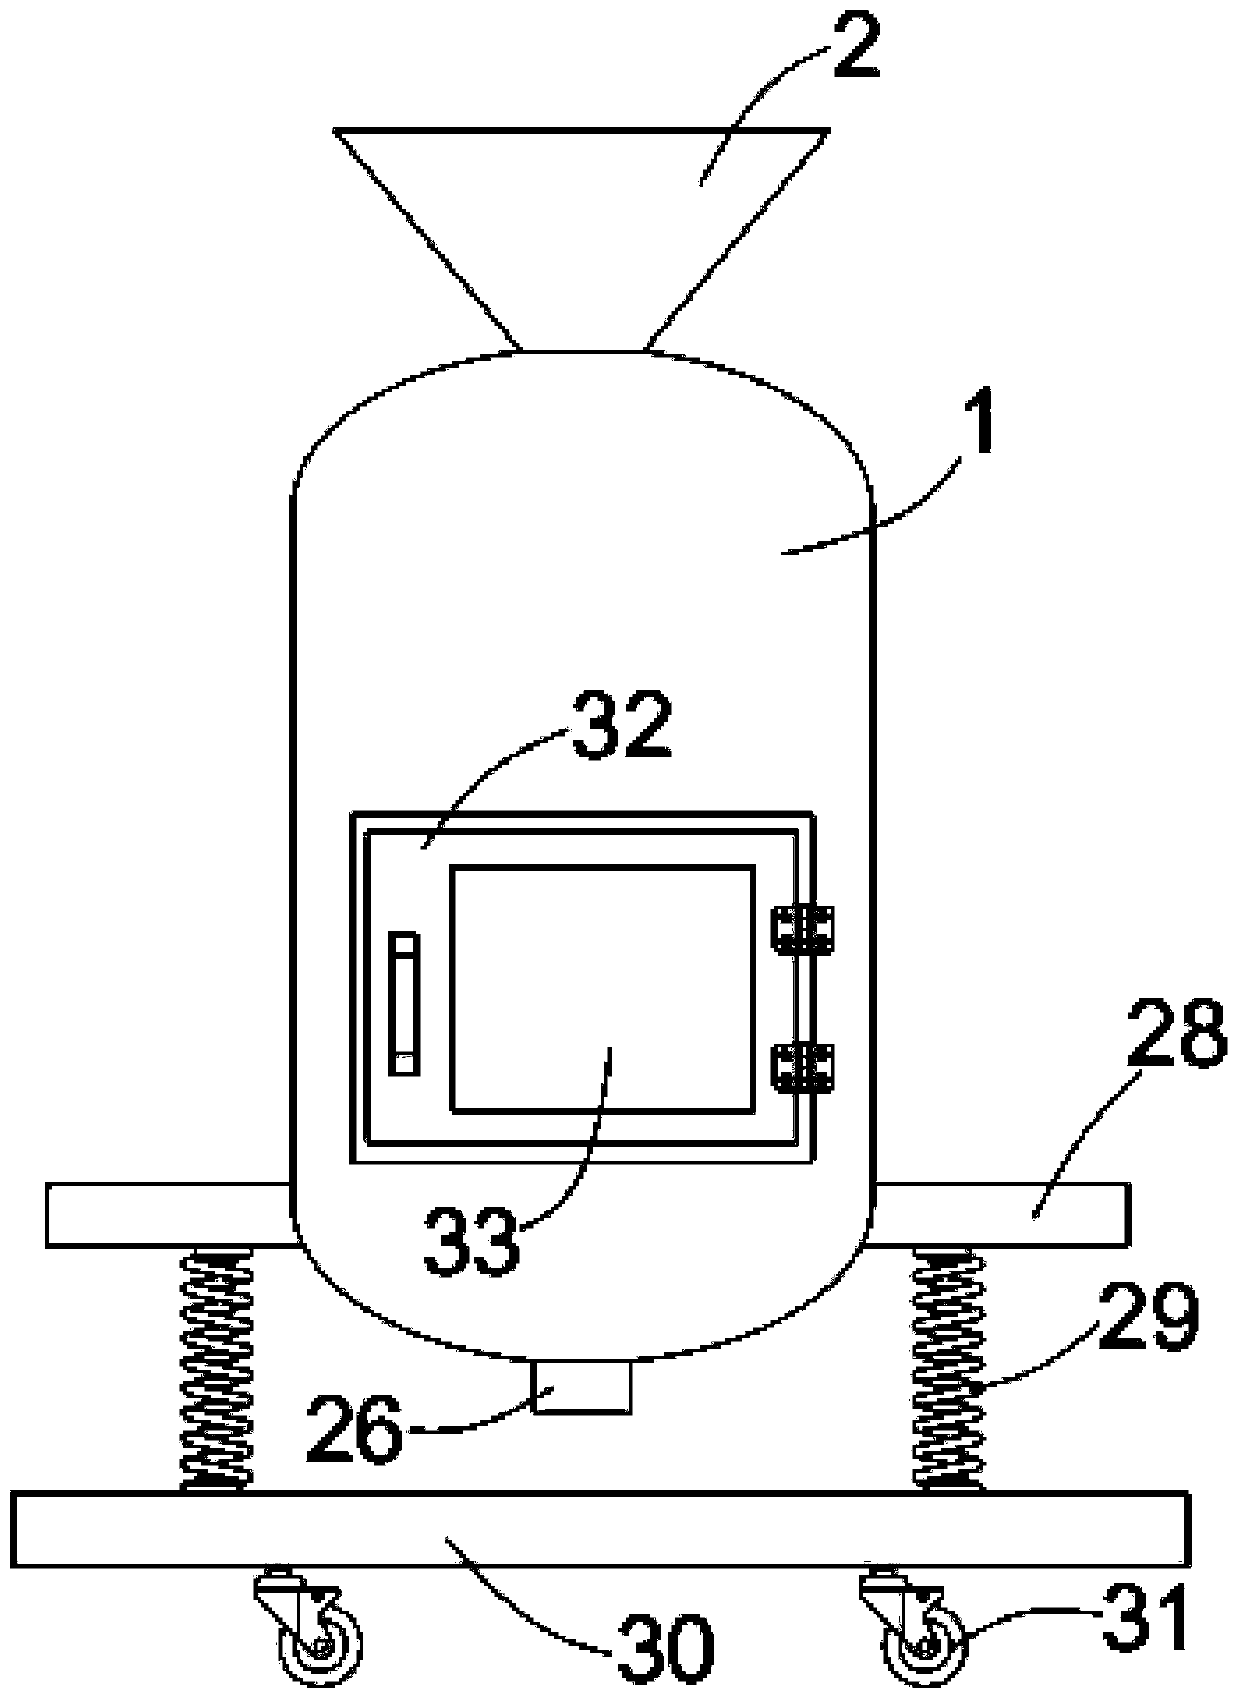 Strawberry seed extracting device